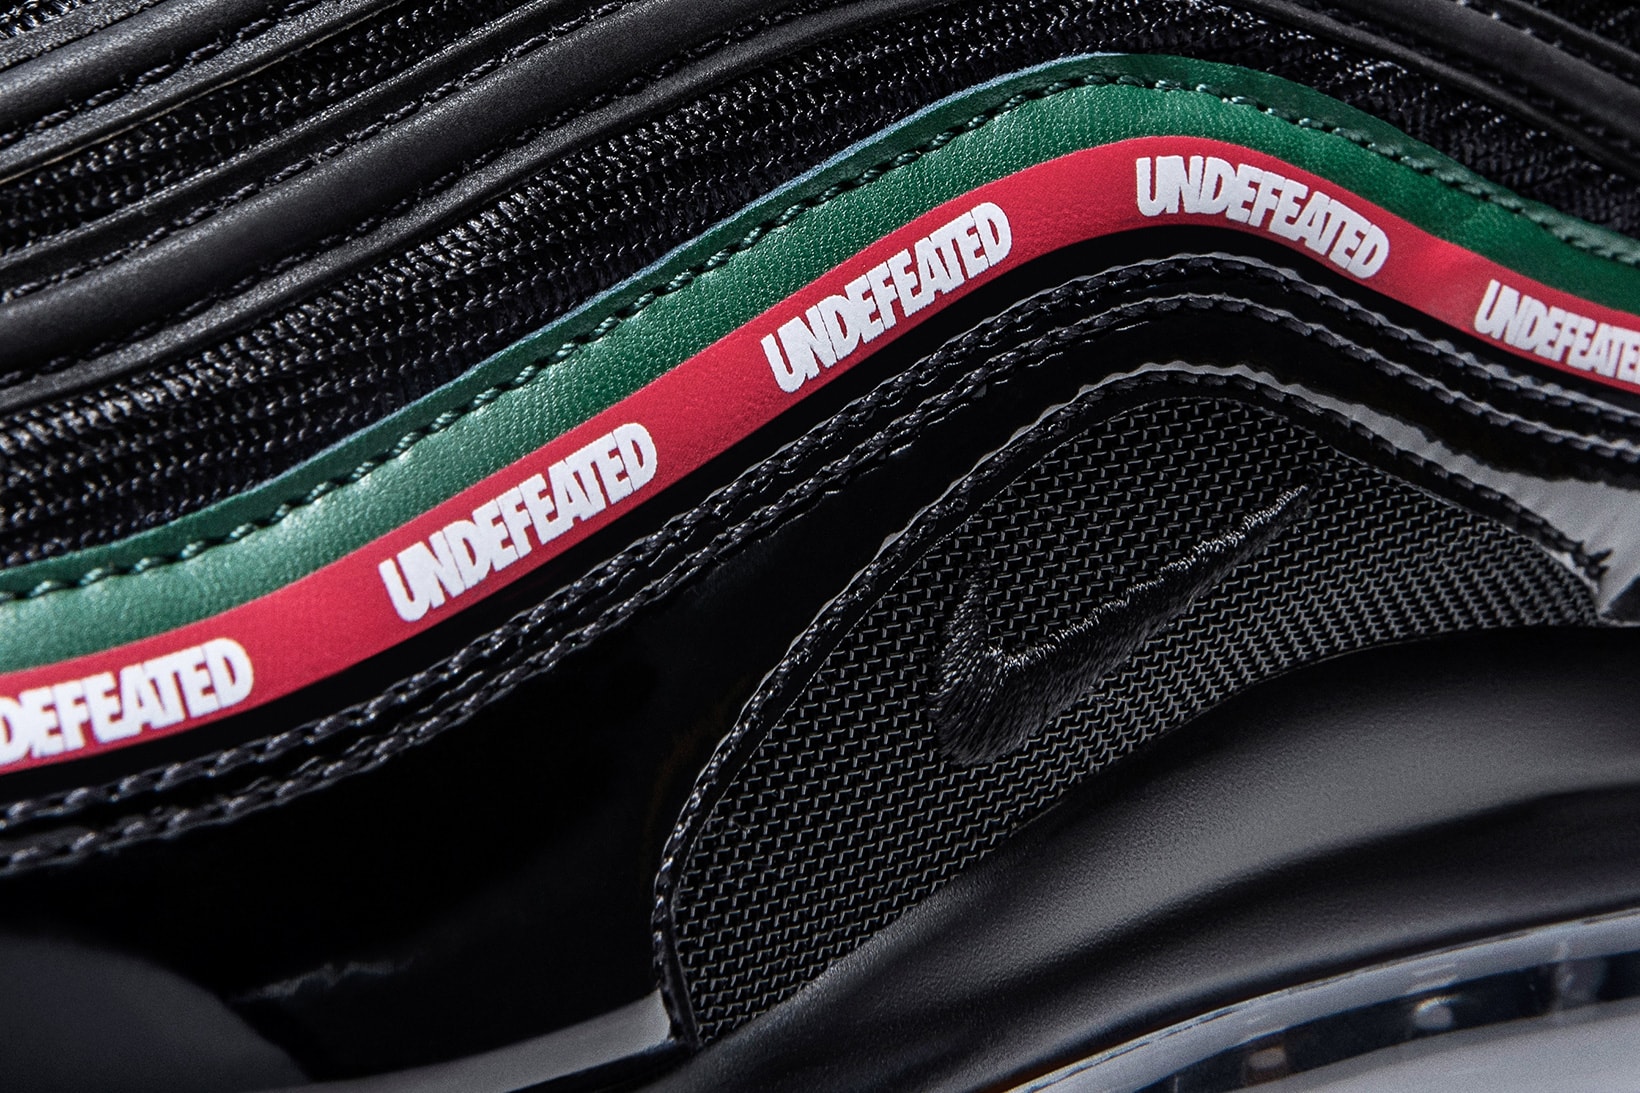 Official Look Release Date UNDEFEATED Nike Air Max 97 footwear black red green white